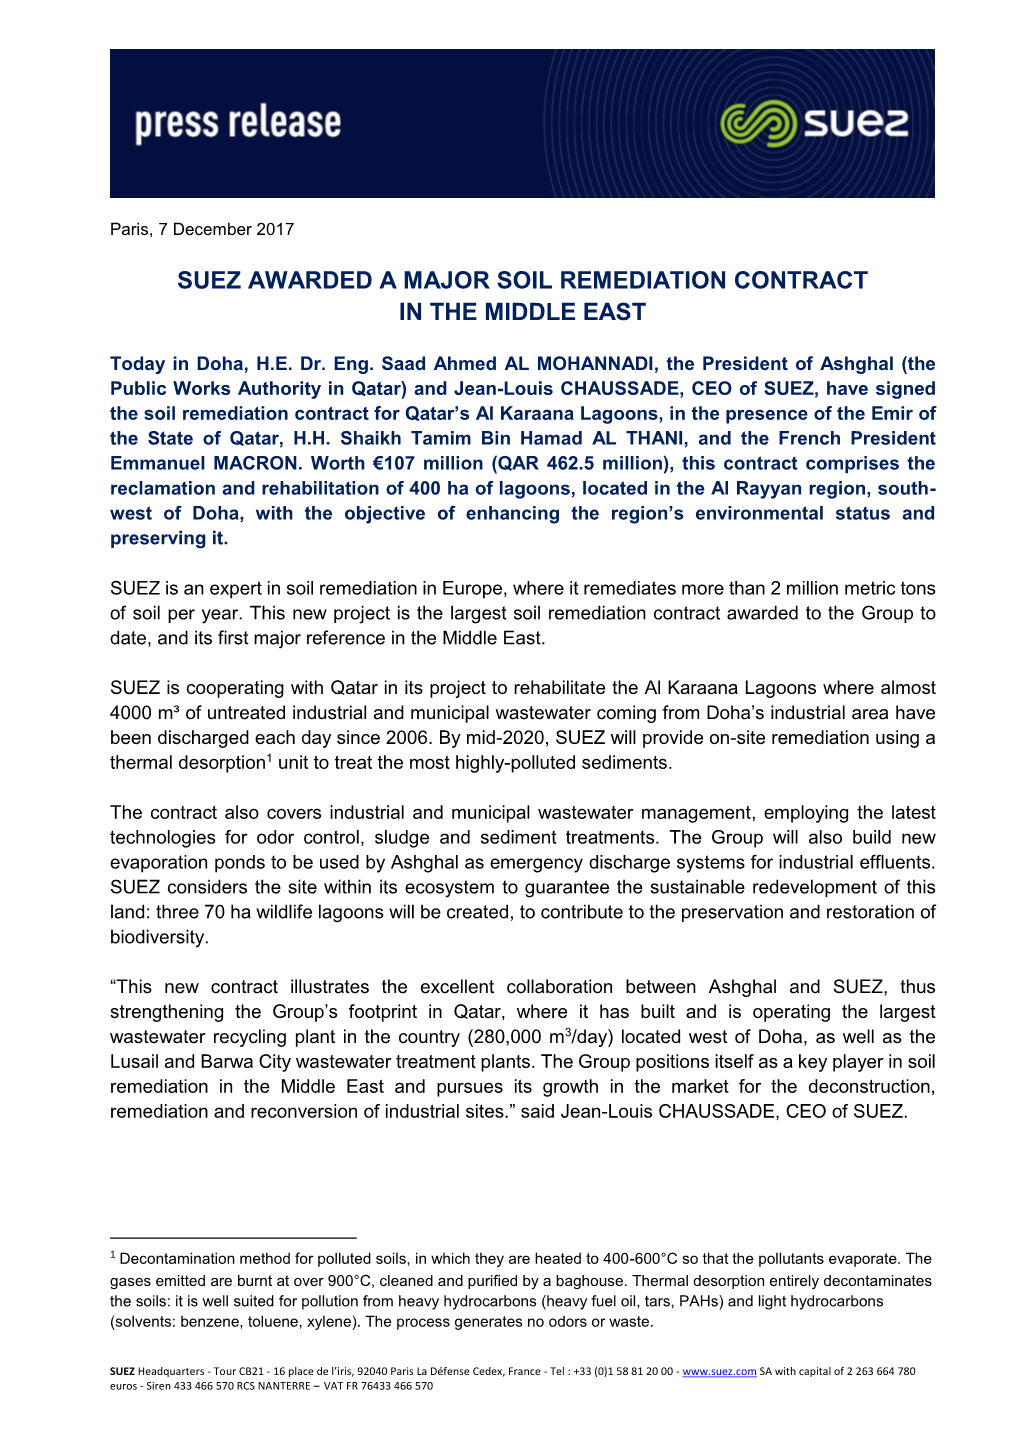 Suez Awarded a Major Soil Remediation Contract in the Middle East